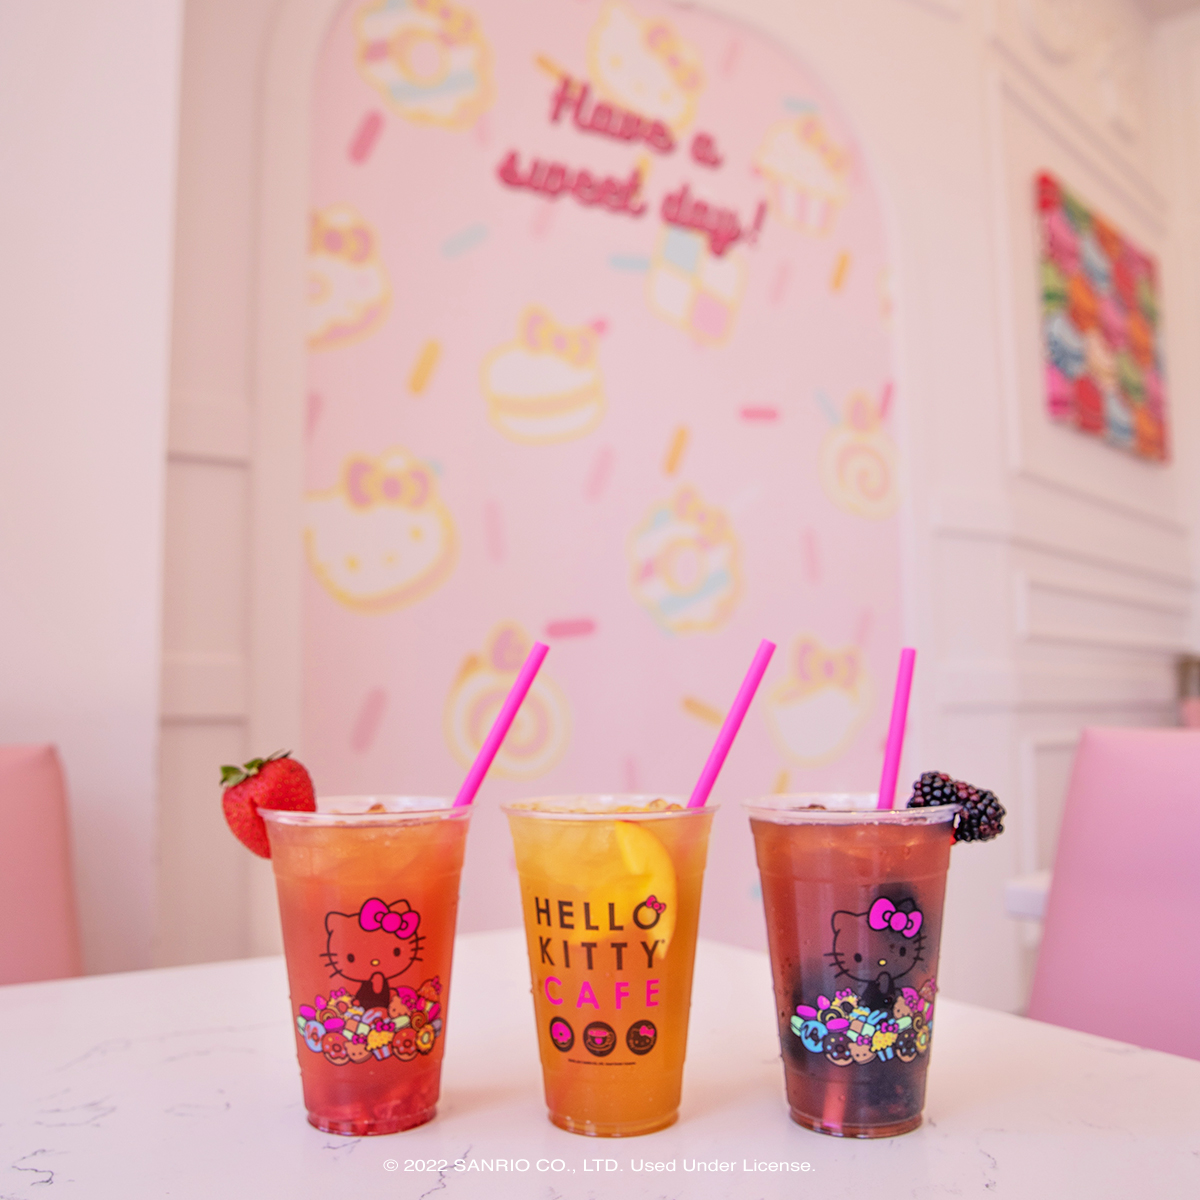 Strawberry, peach, or blackberry? It's a tea-rrific day to enjoy a yummy fruit tea 🍵💞 

P.S. Did you know you can add popping boba to any iced tea? Available only at the #HelloKittyGrandCafe✨